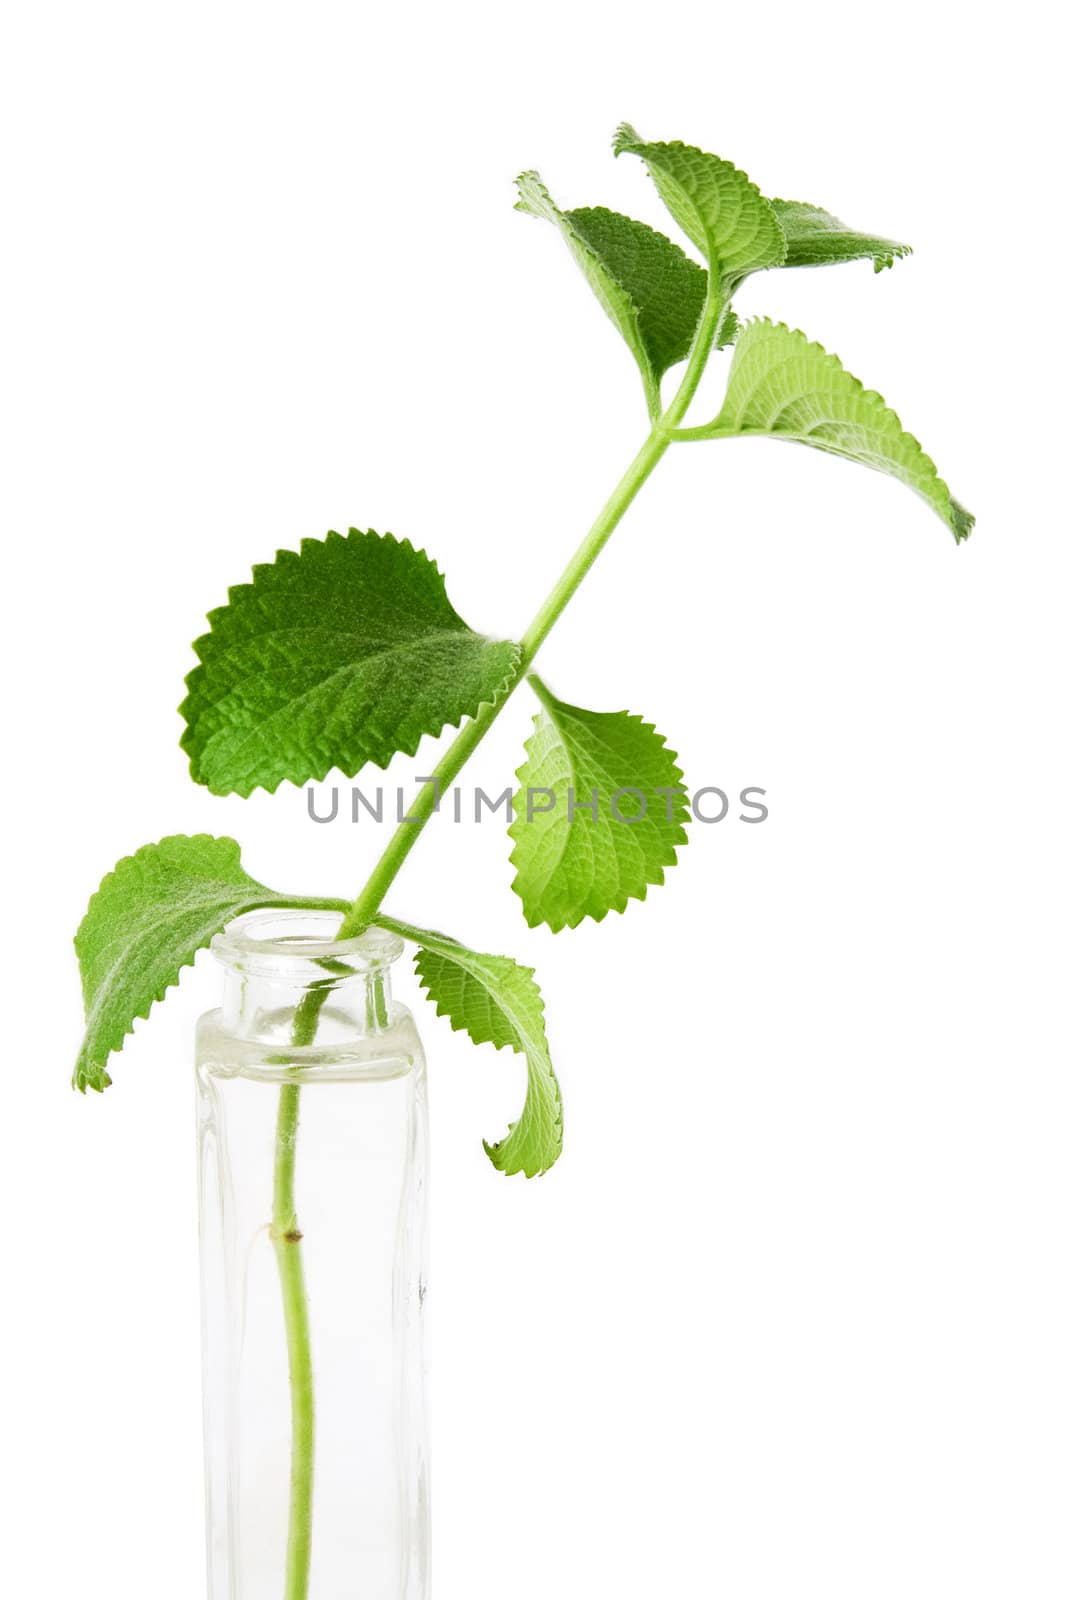 Mint in the glass vase on a white background